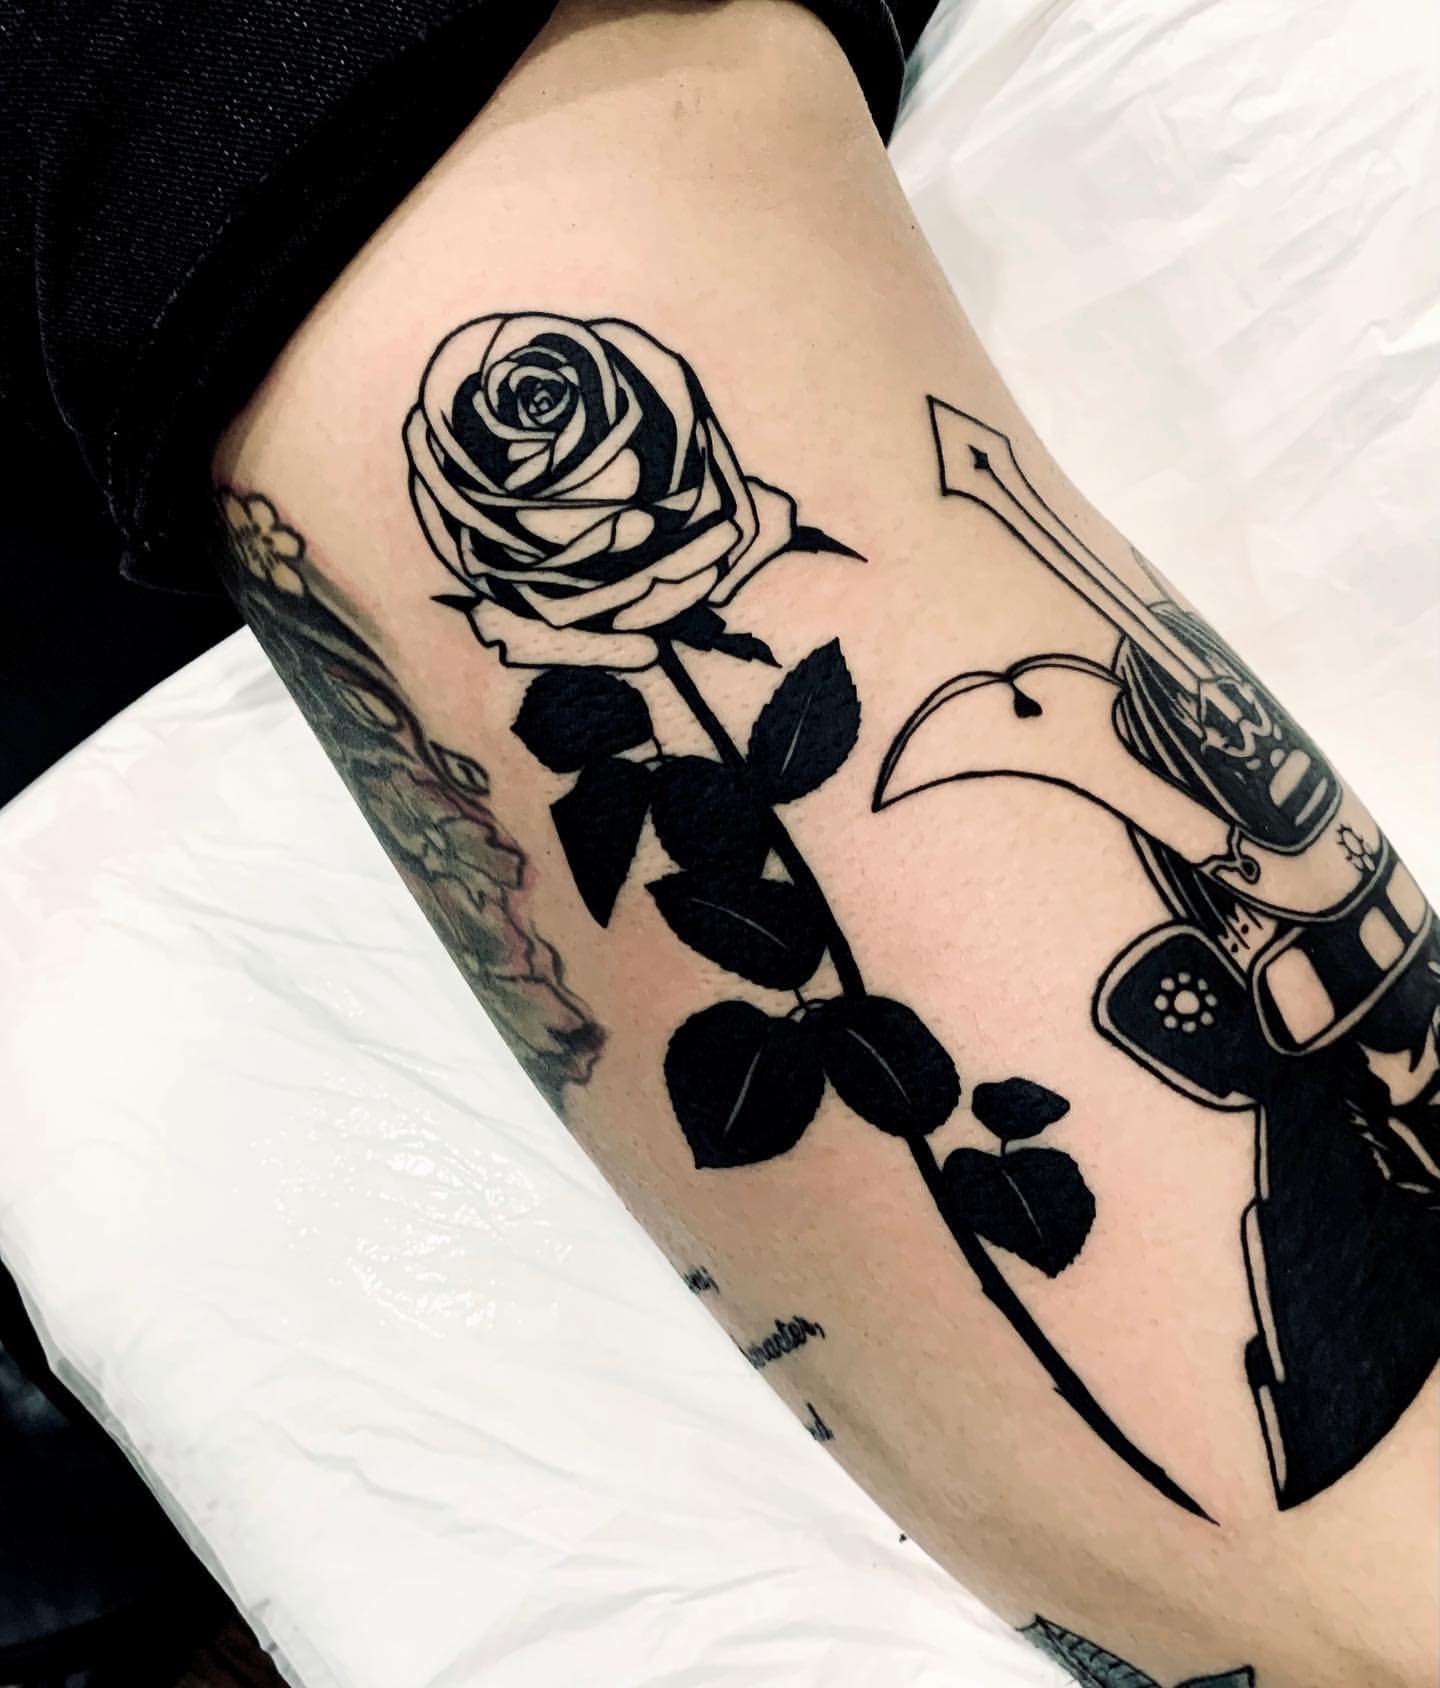 Black rose tattoo on the right thigh